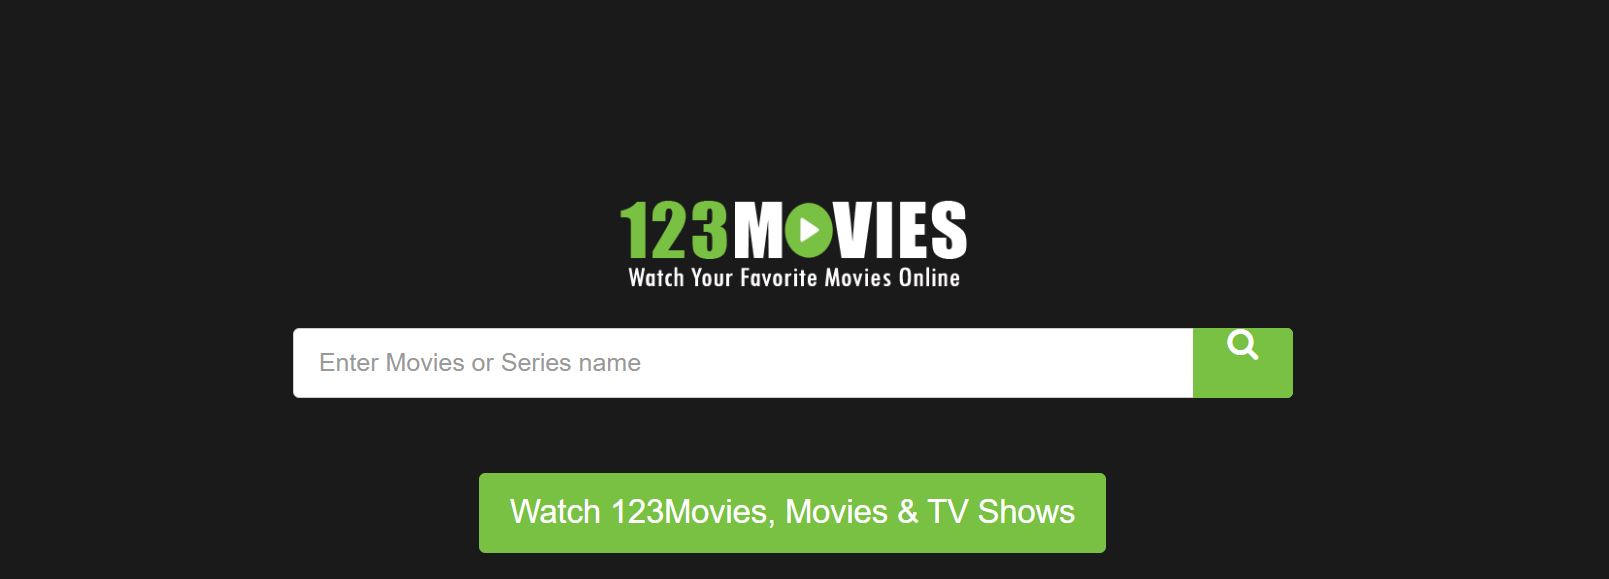 123 Free Movies | Download latest movies in 123 free movies